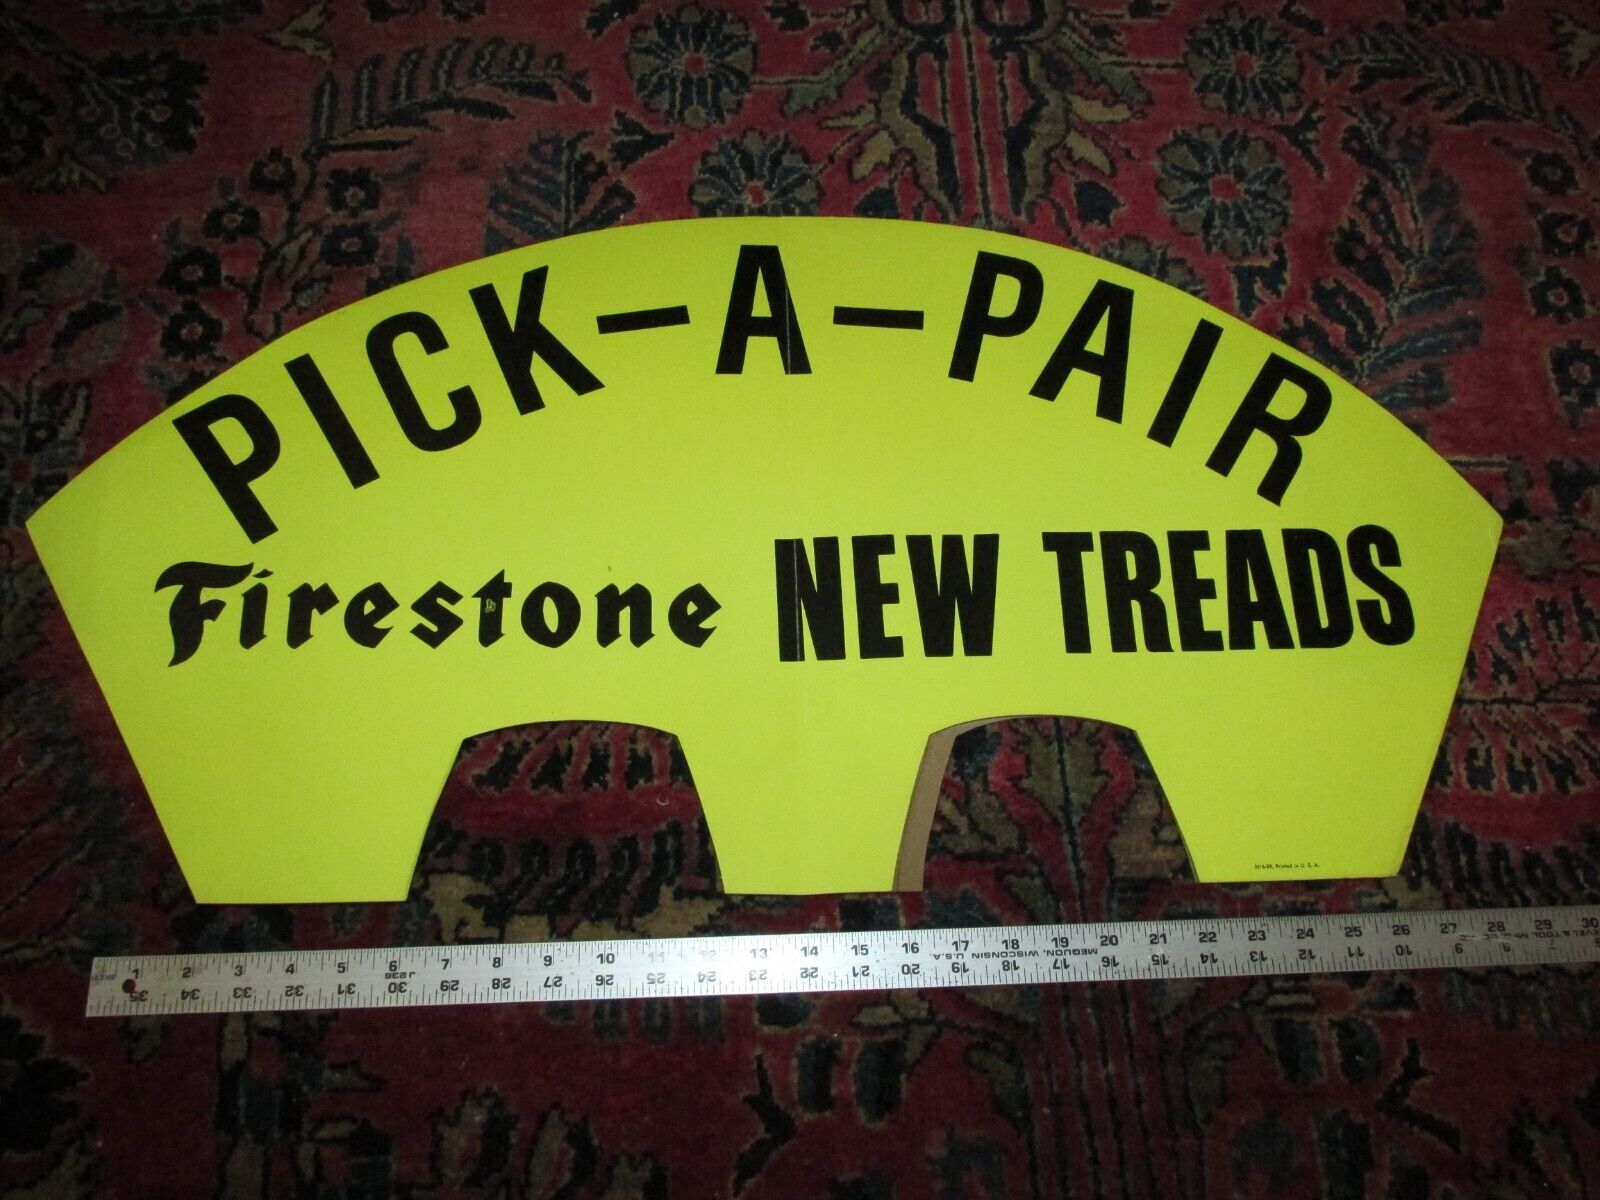 VTG FIRESTONE TIRE DEALER AD 1959 SIGN PICK A PAIR NEW TREADS ORIG RETAIL STORE